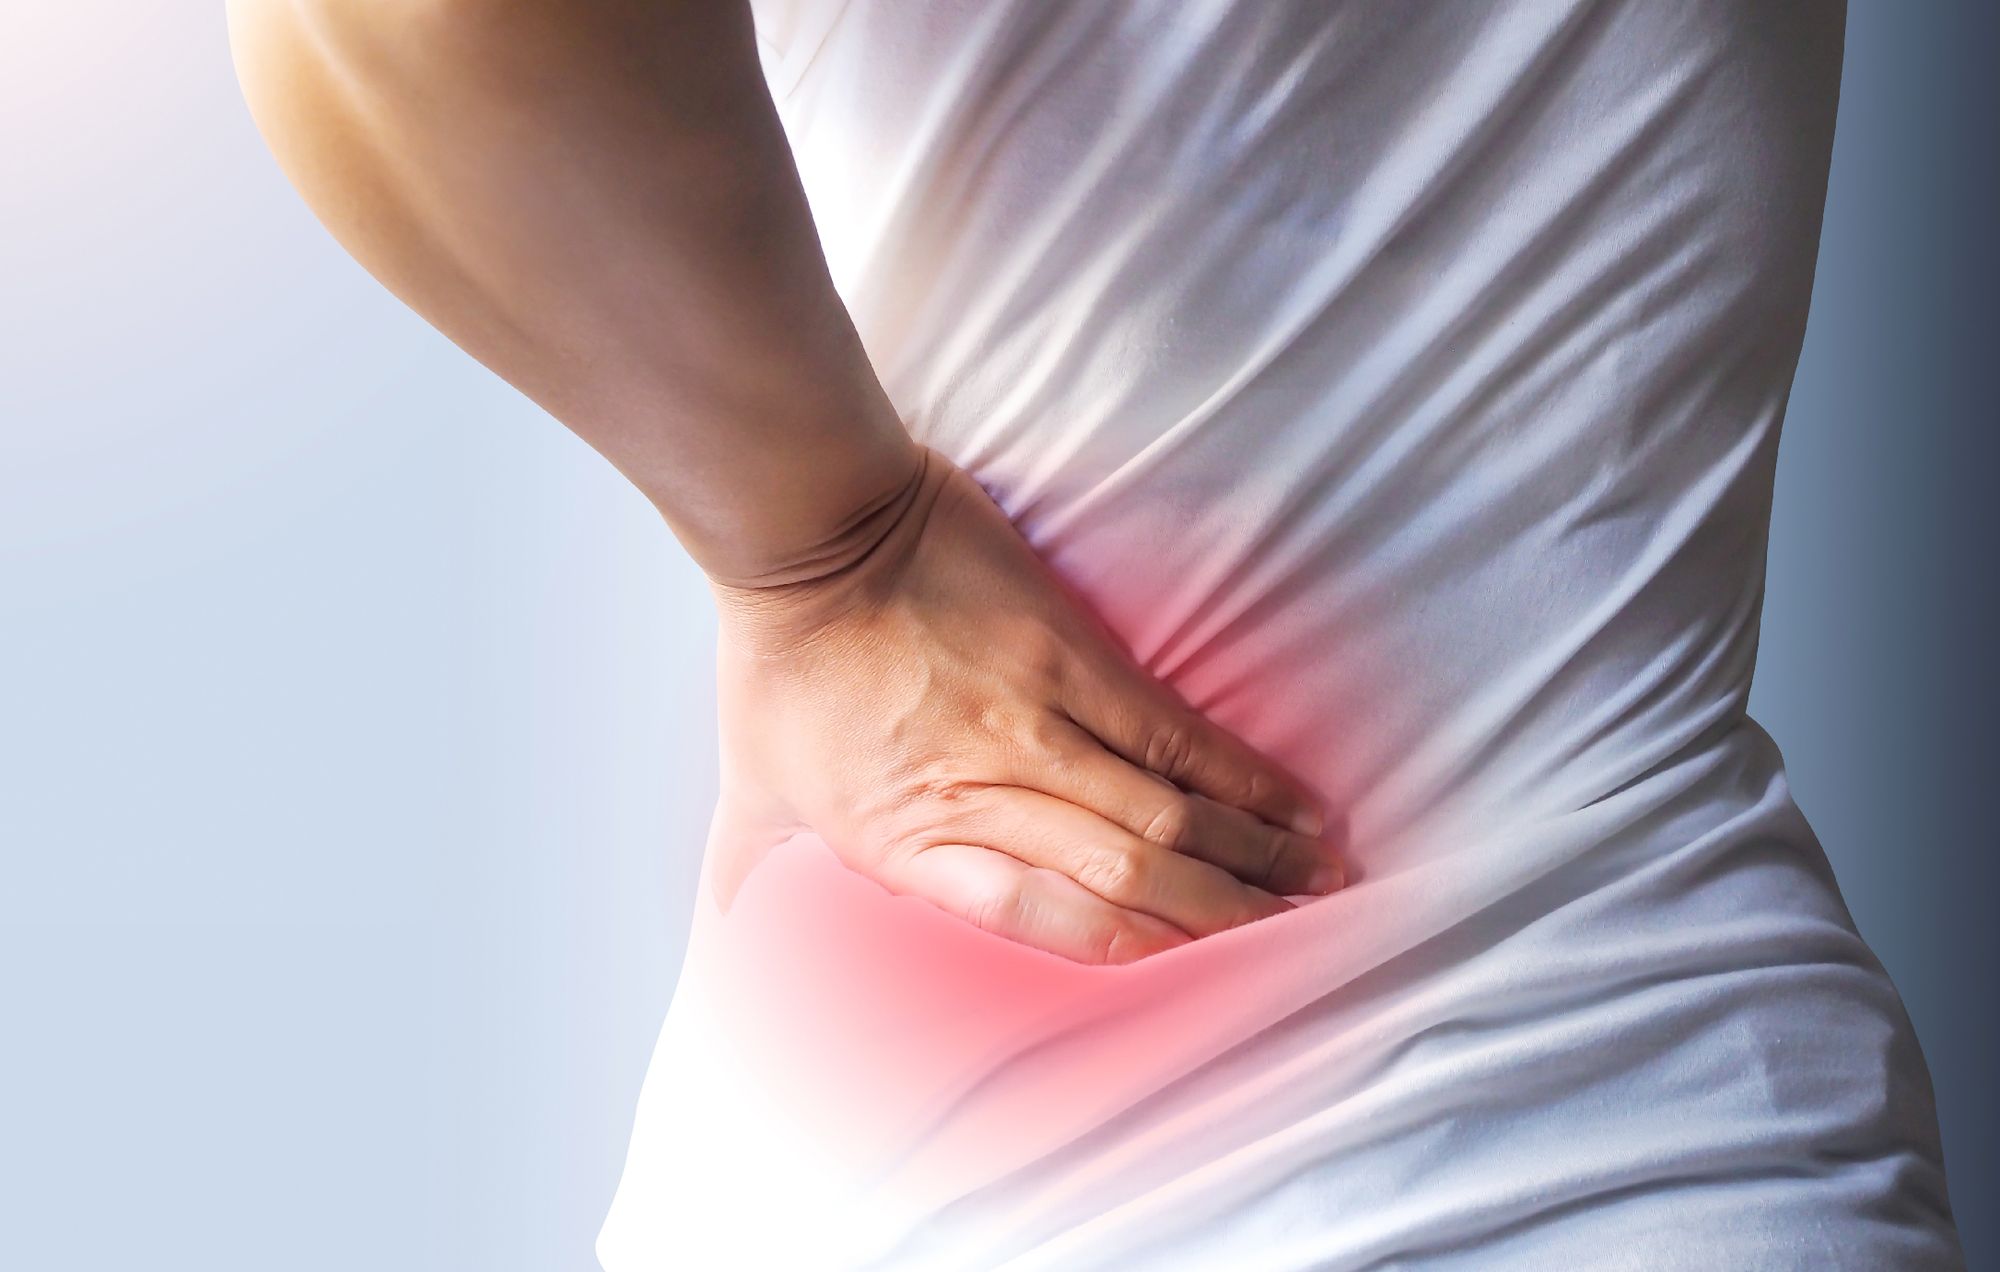                      Tips for dealing with back pain                             
                     